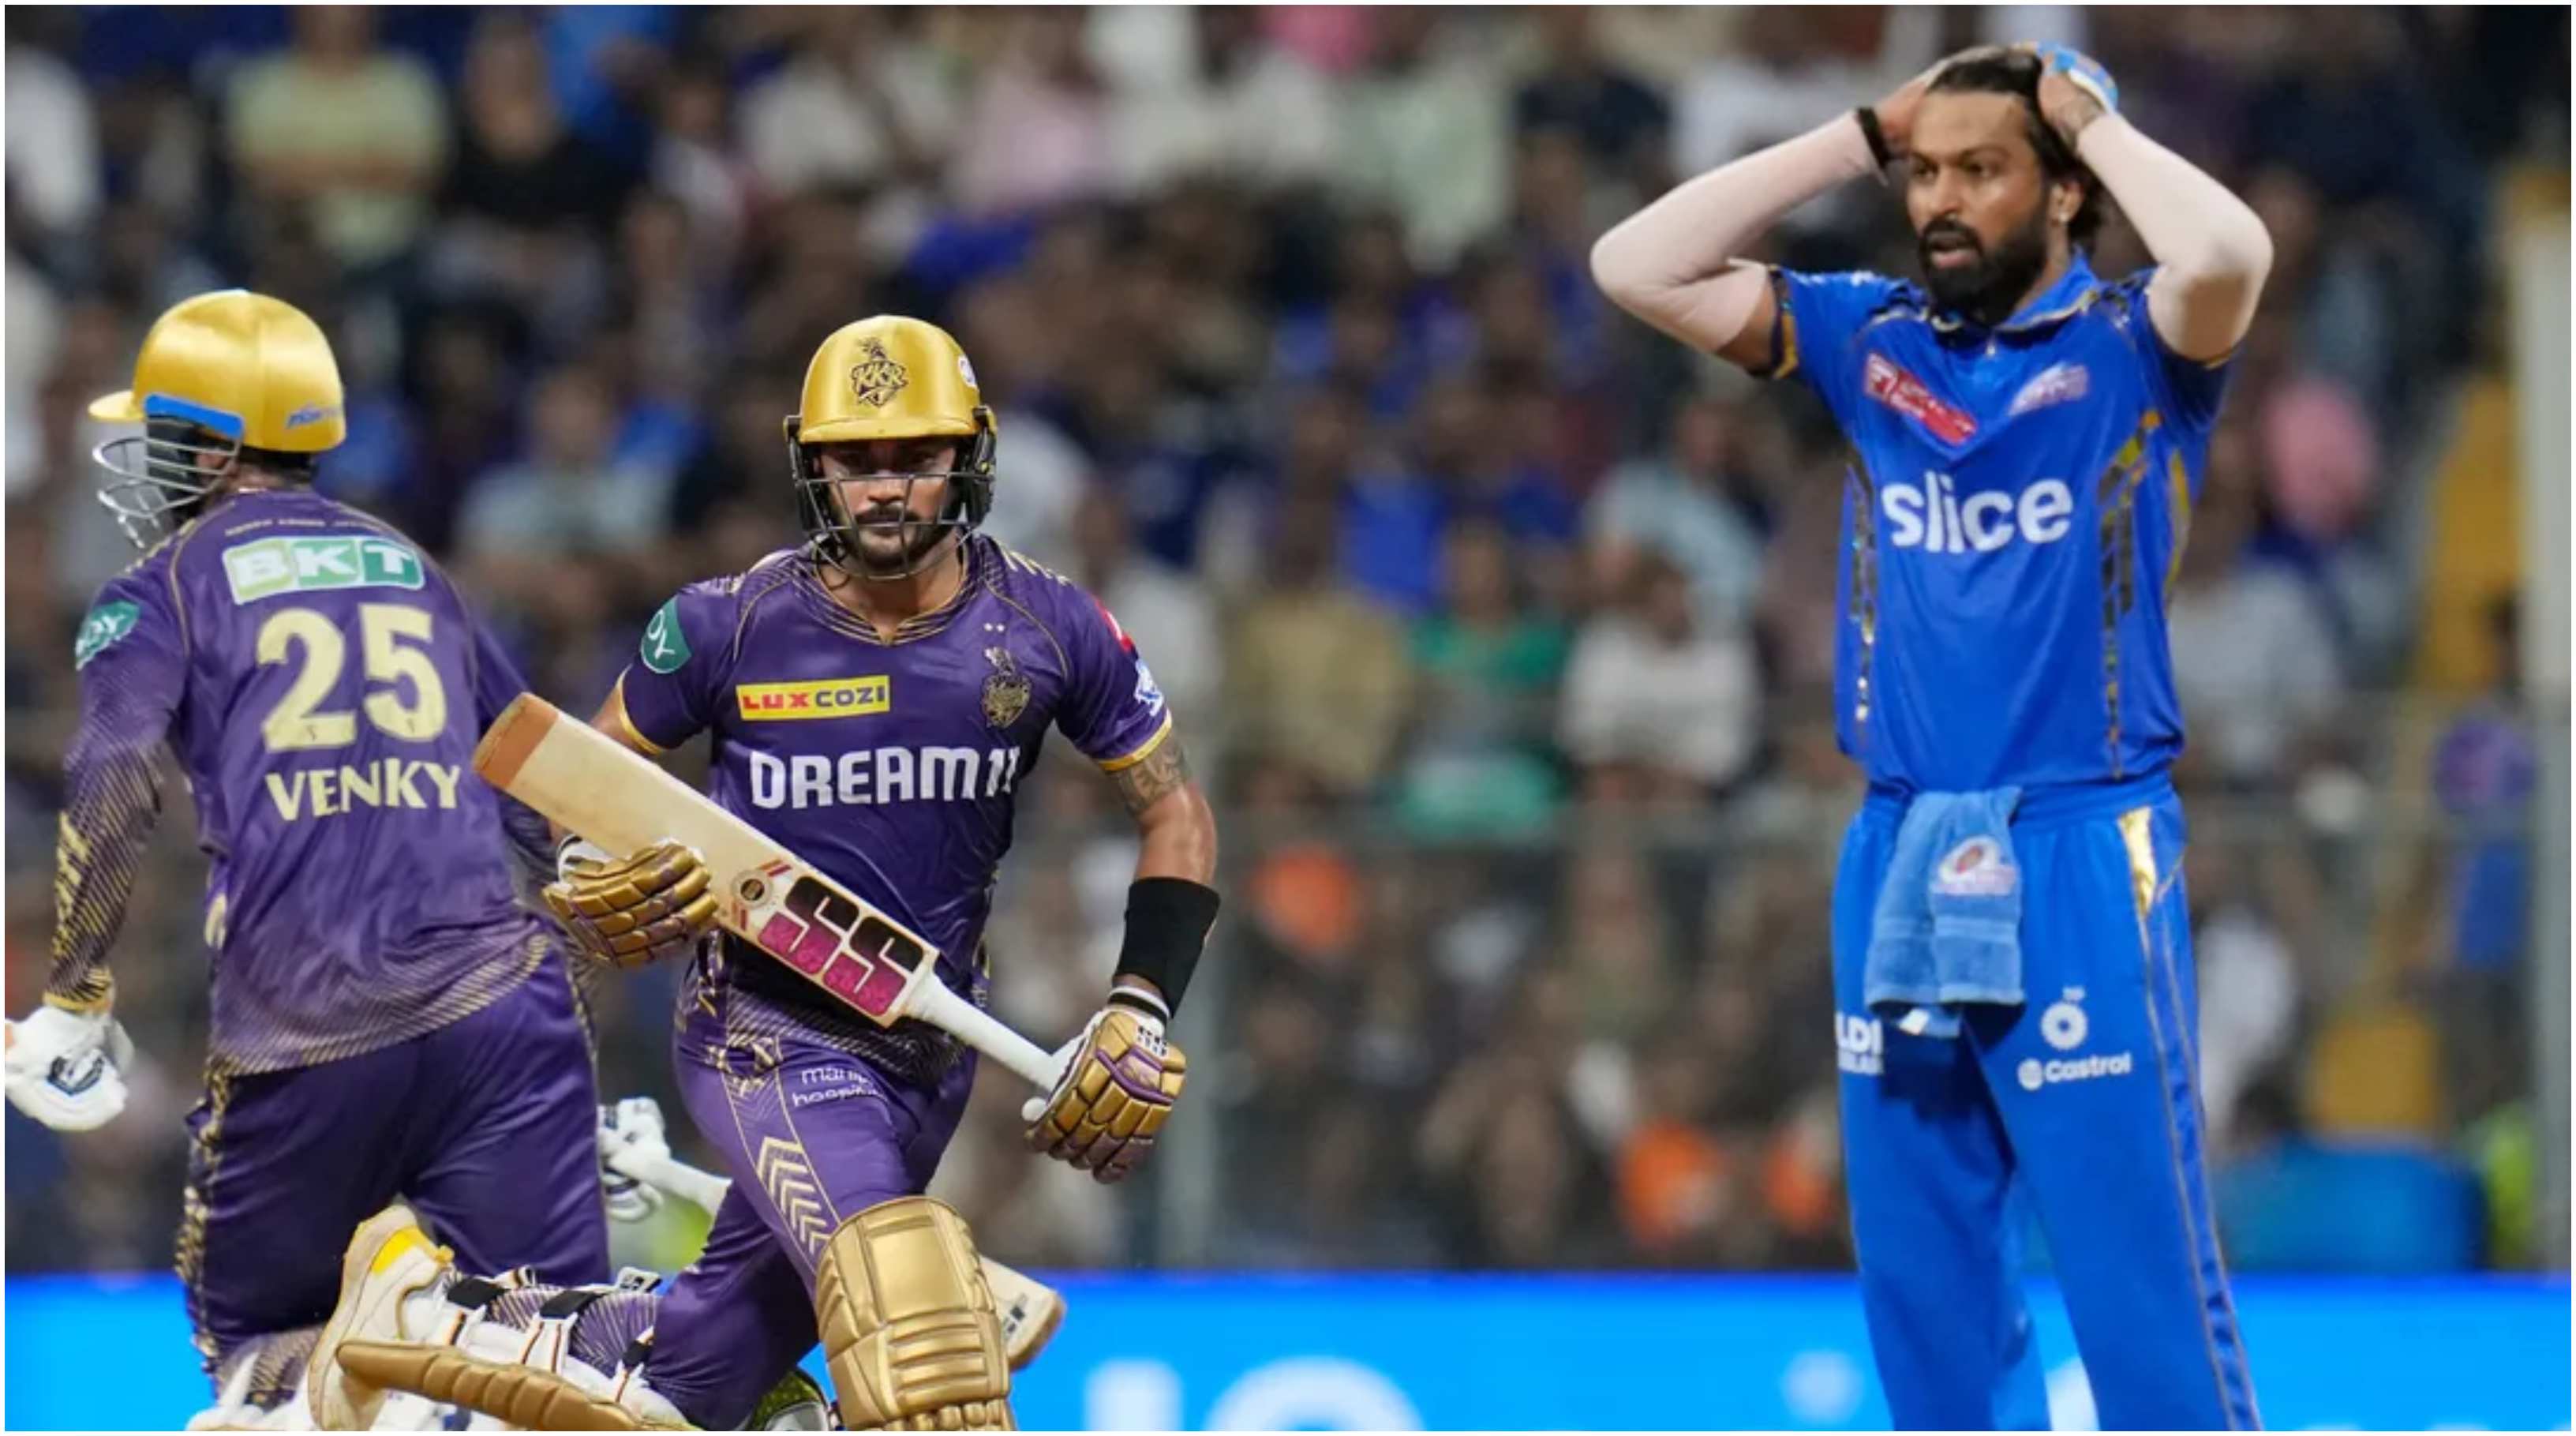 MI have lost 8 out of 11 games in the ongoing IPL so far | BCCI-IPL